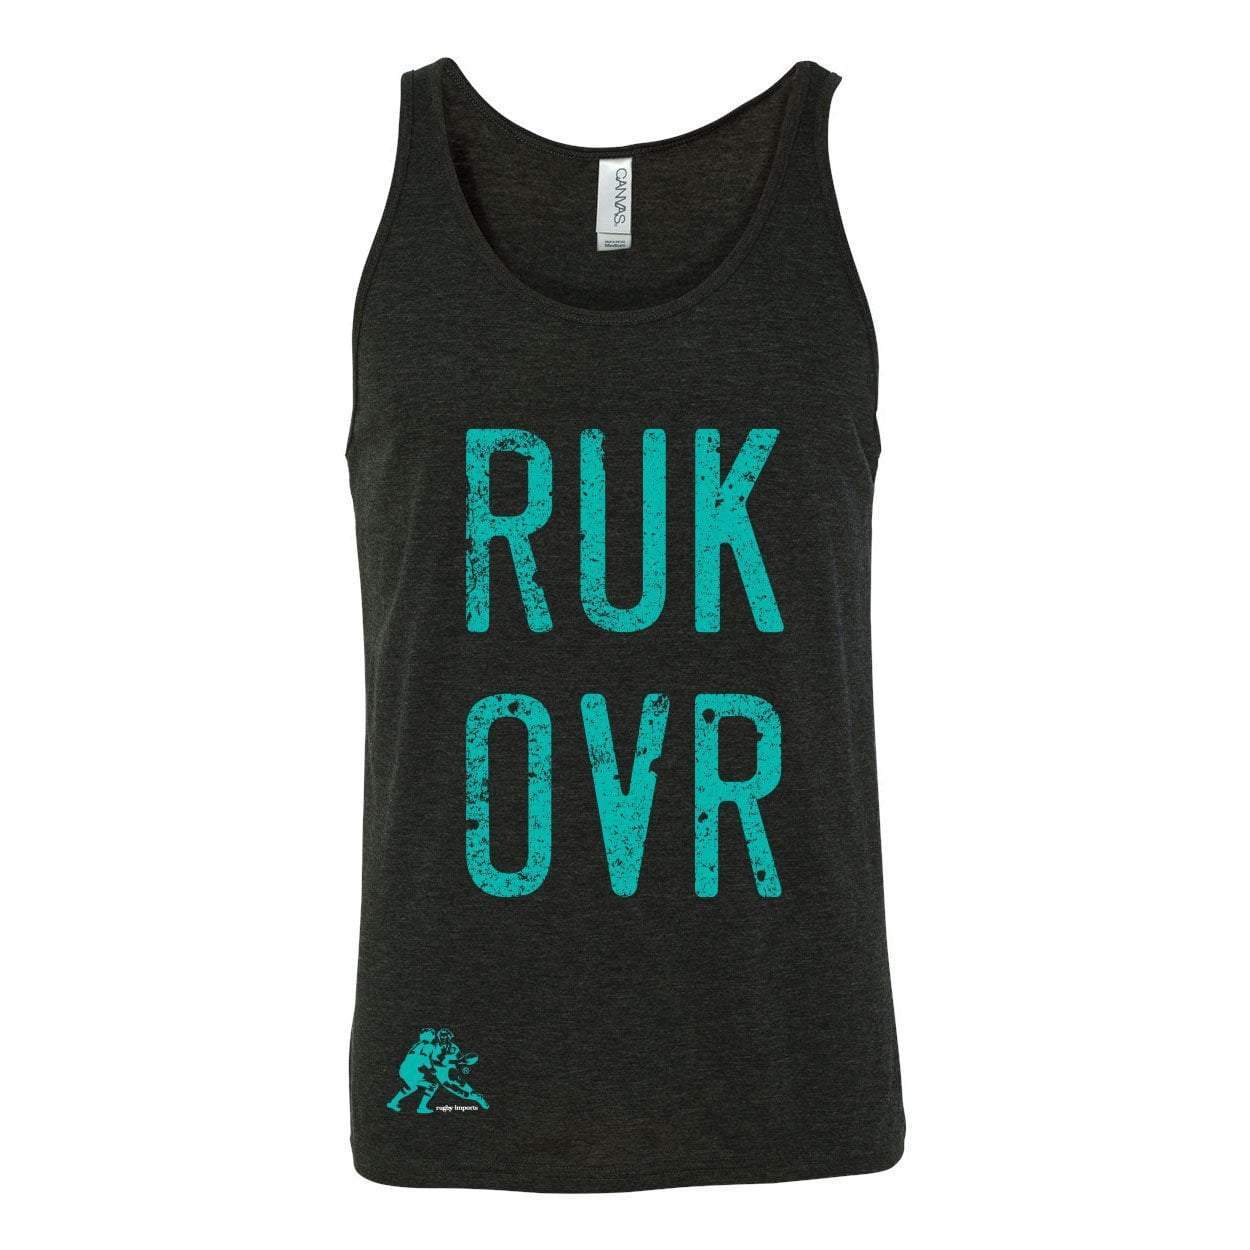 Rugby Imports RUK OVR Tank Top - Charcoal